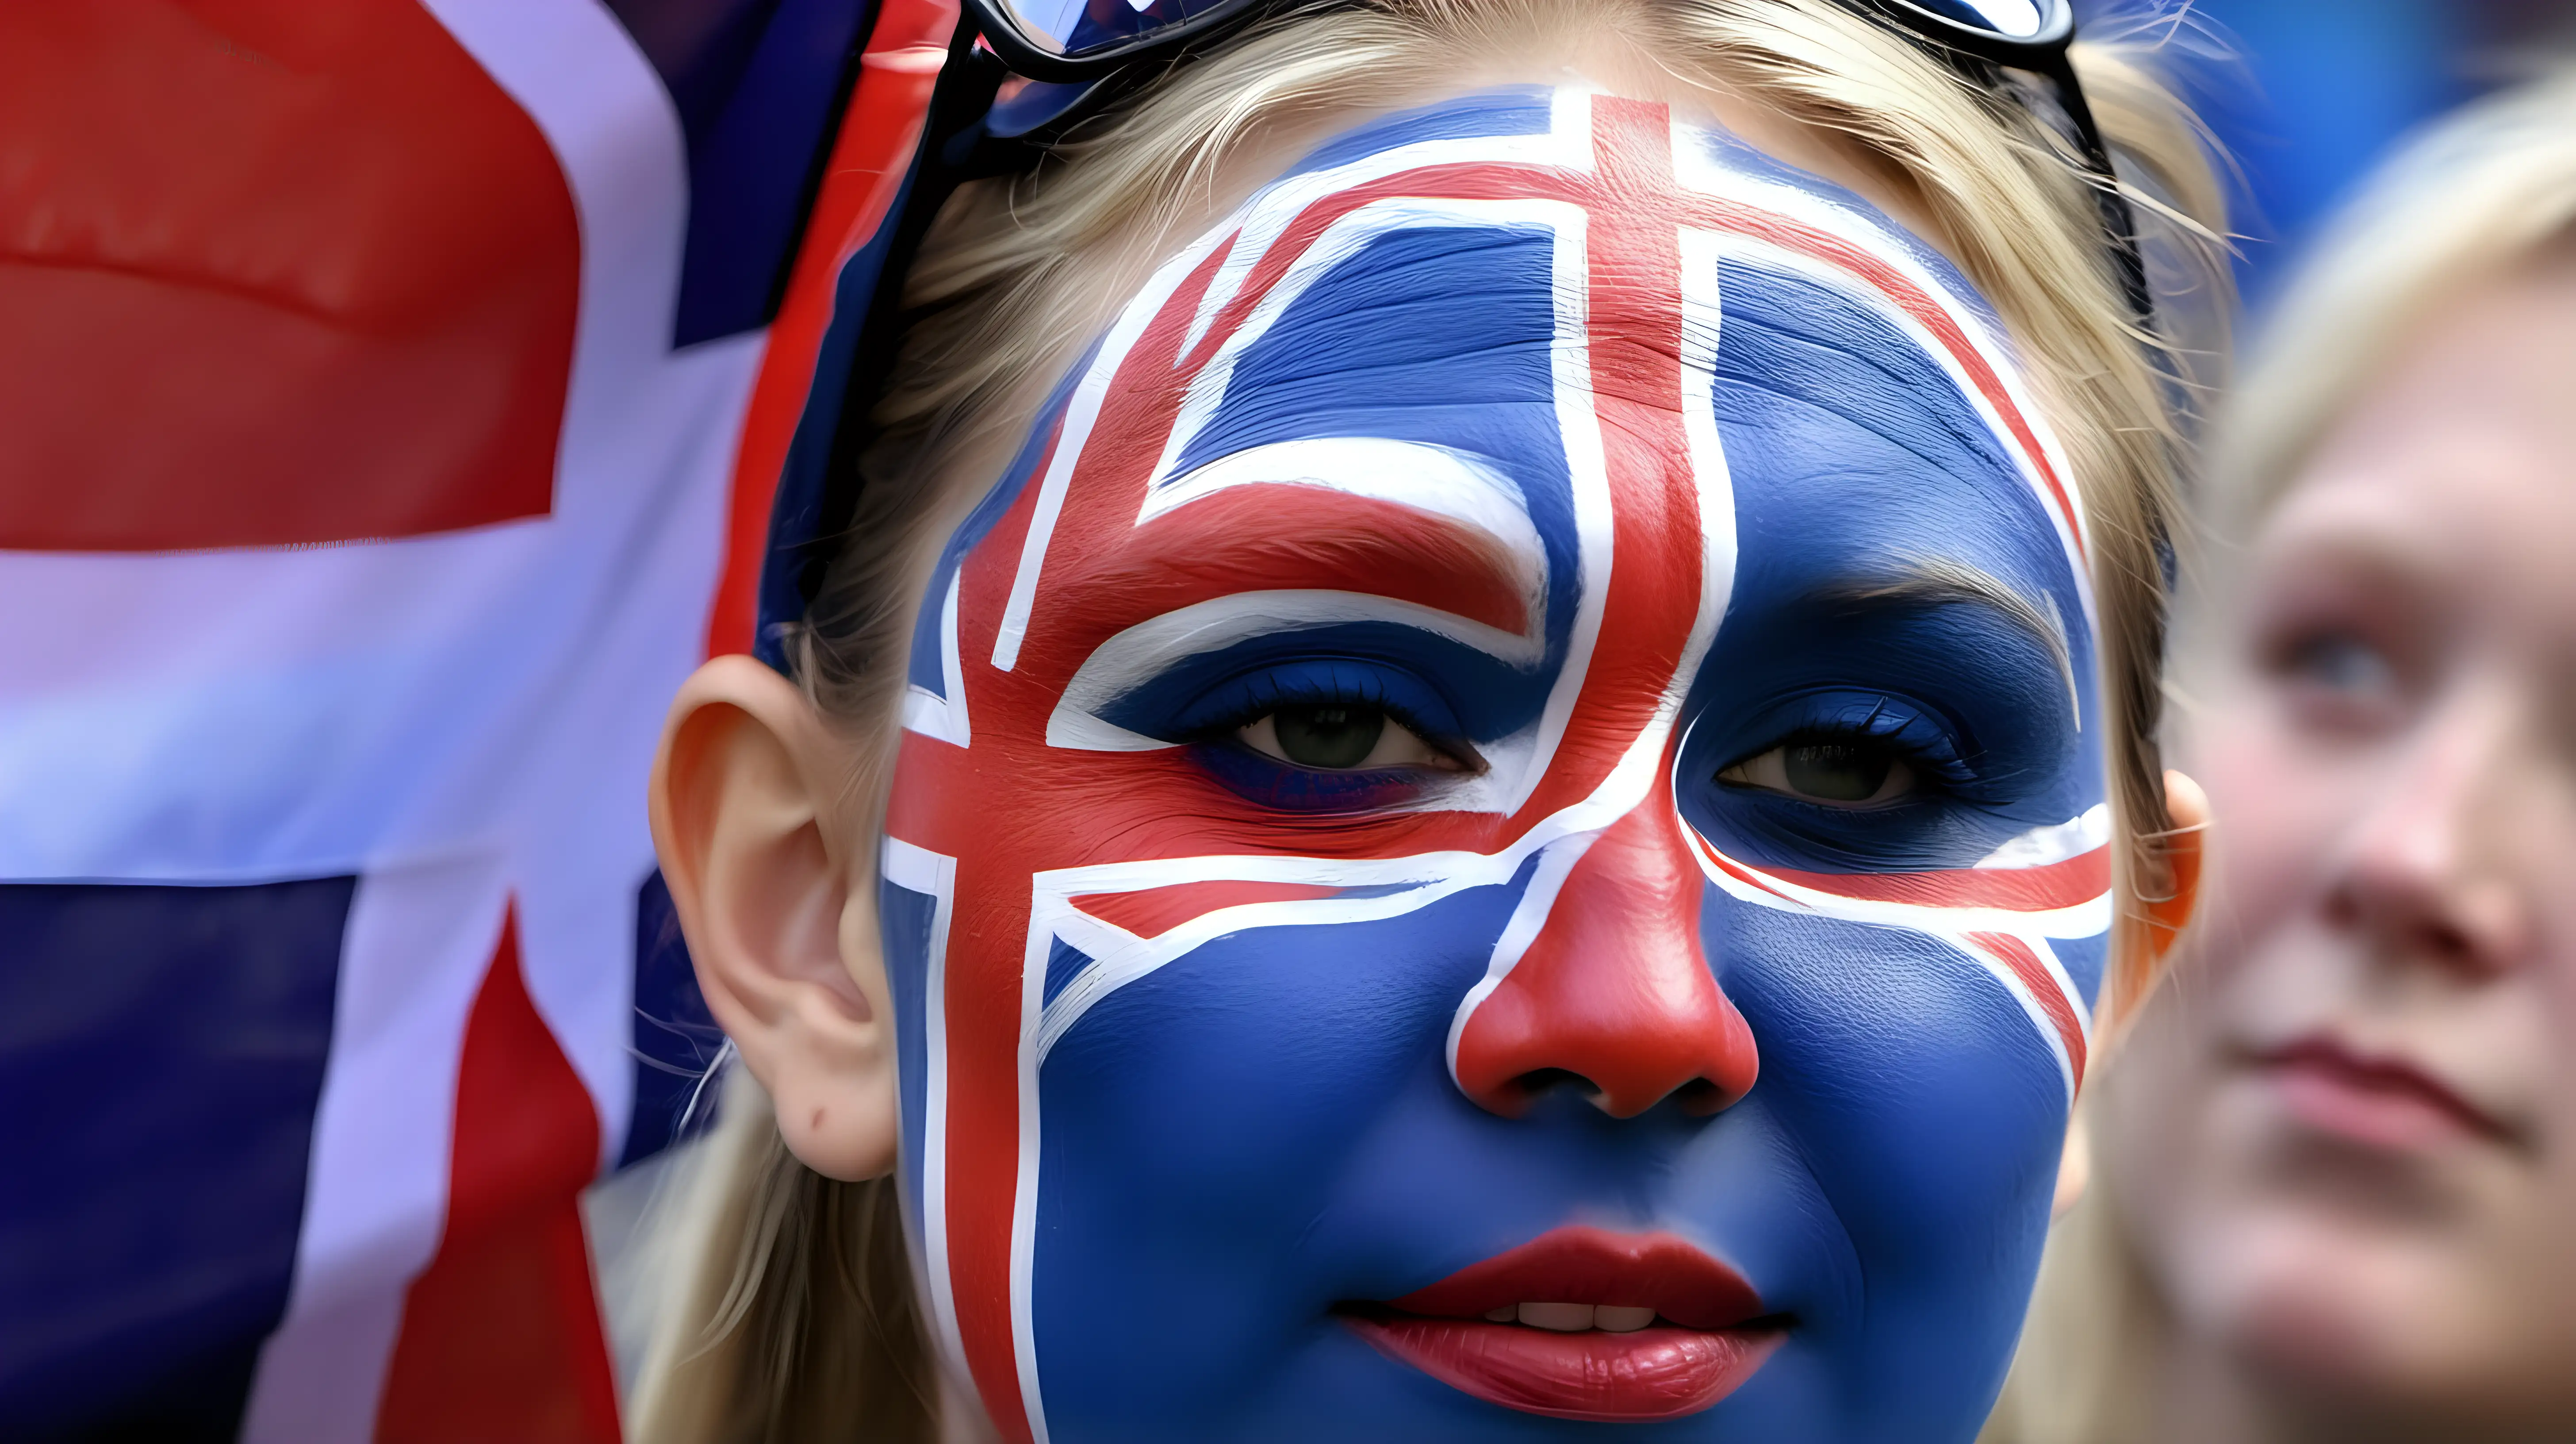 Union Jack Face Paint Spectator at National Sporting Event